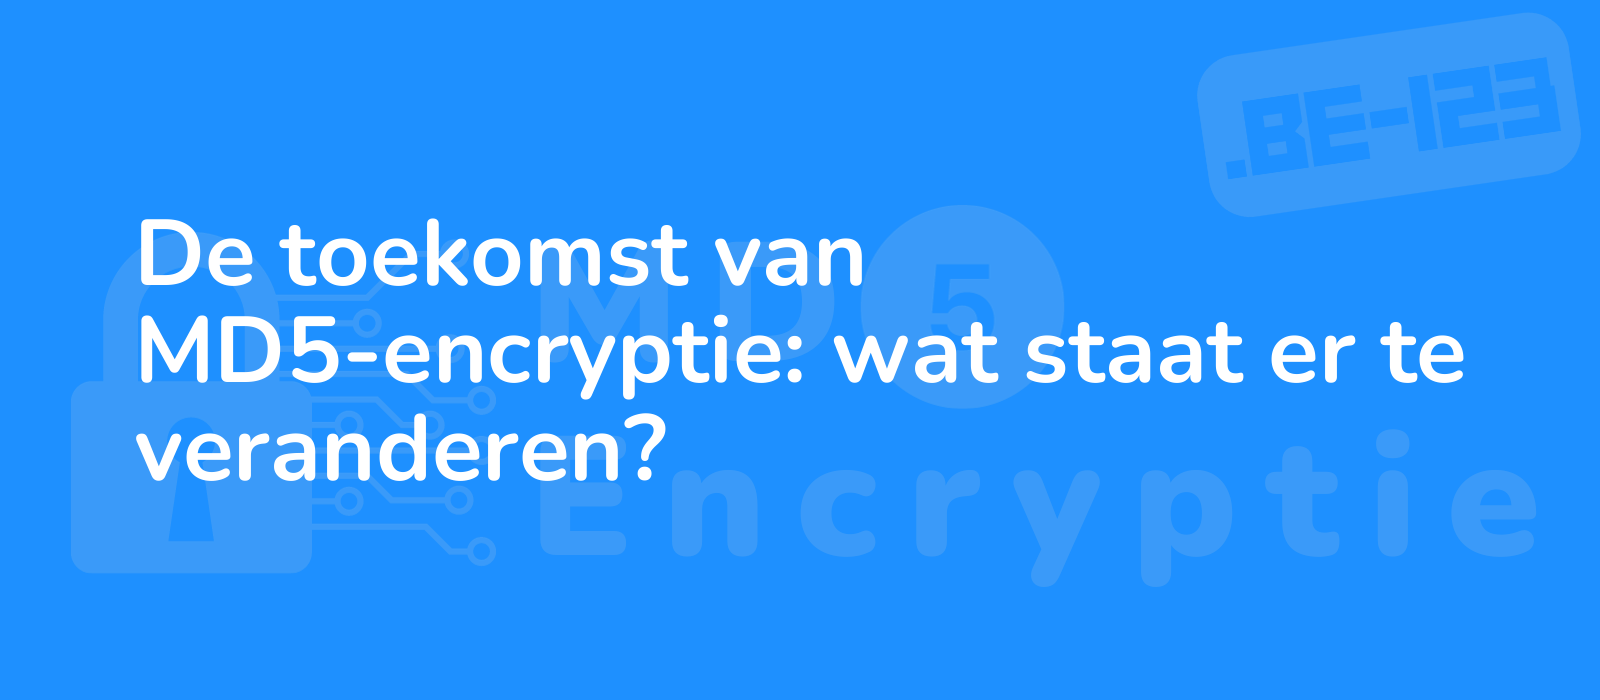 modern digital encryption concept futuristic blue background with binary code and padlock symbol symbolizing advancements and changes in md5 encryption